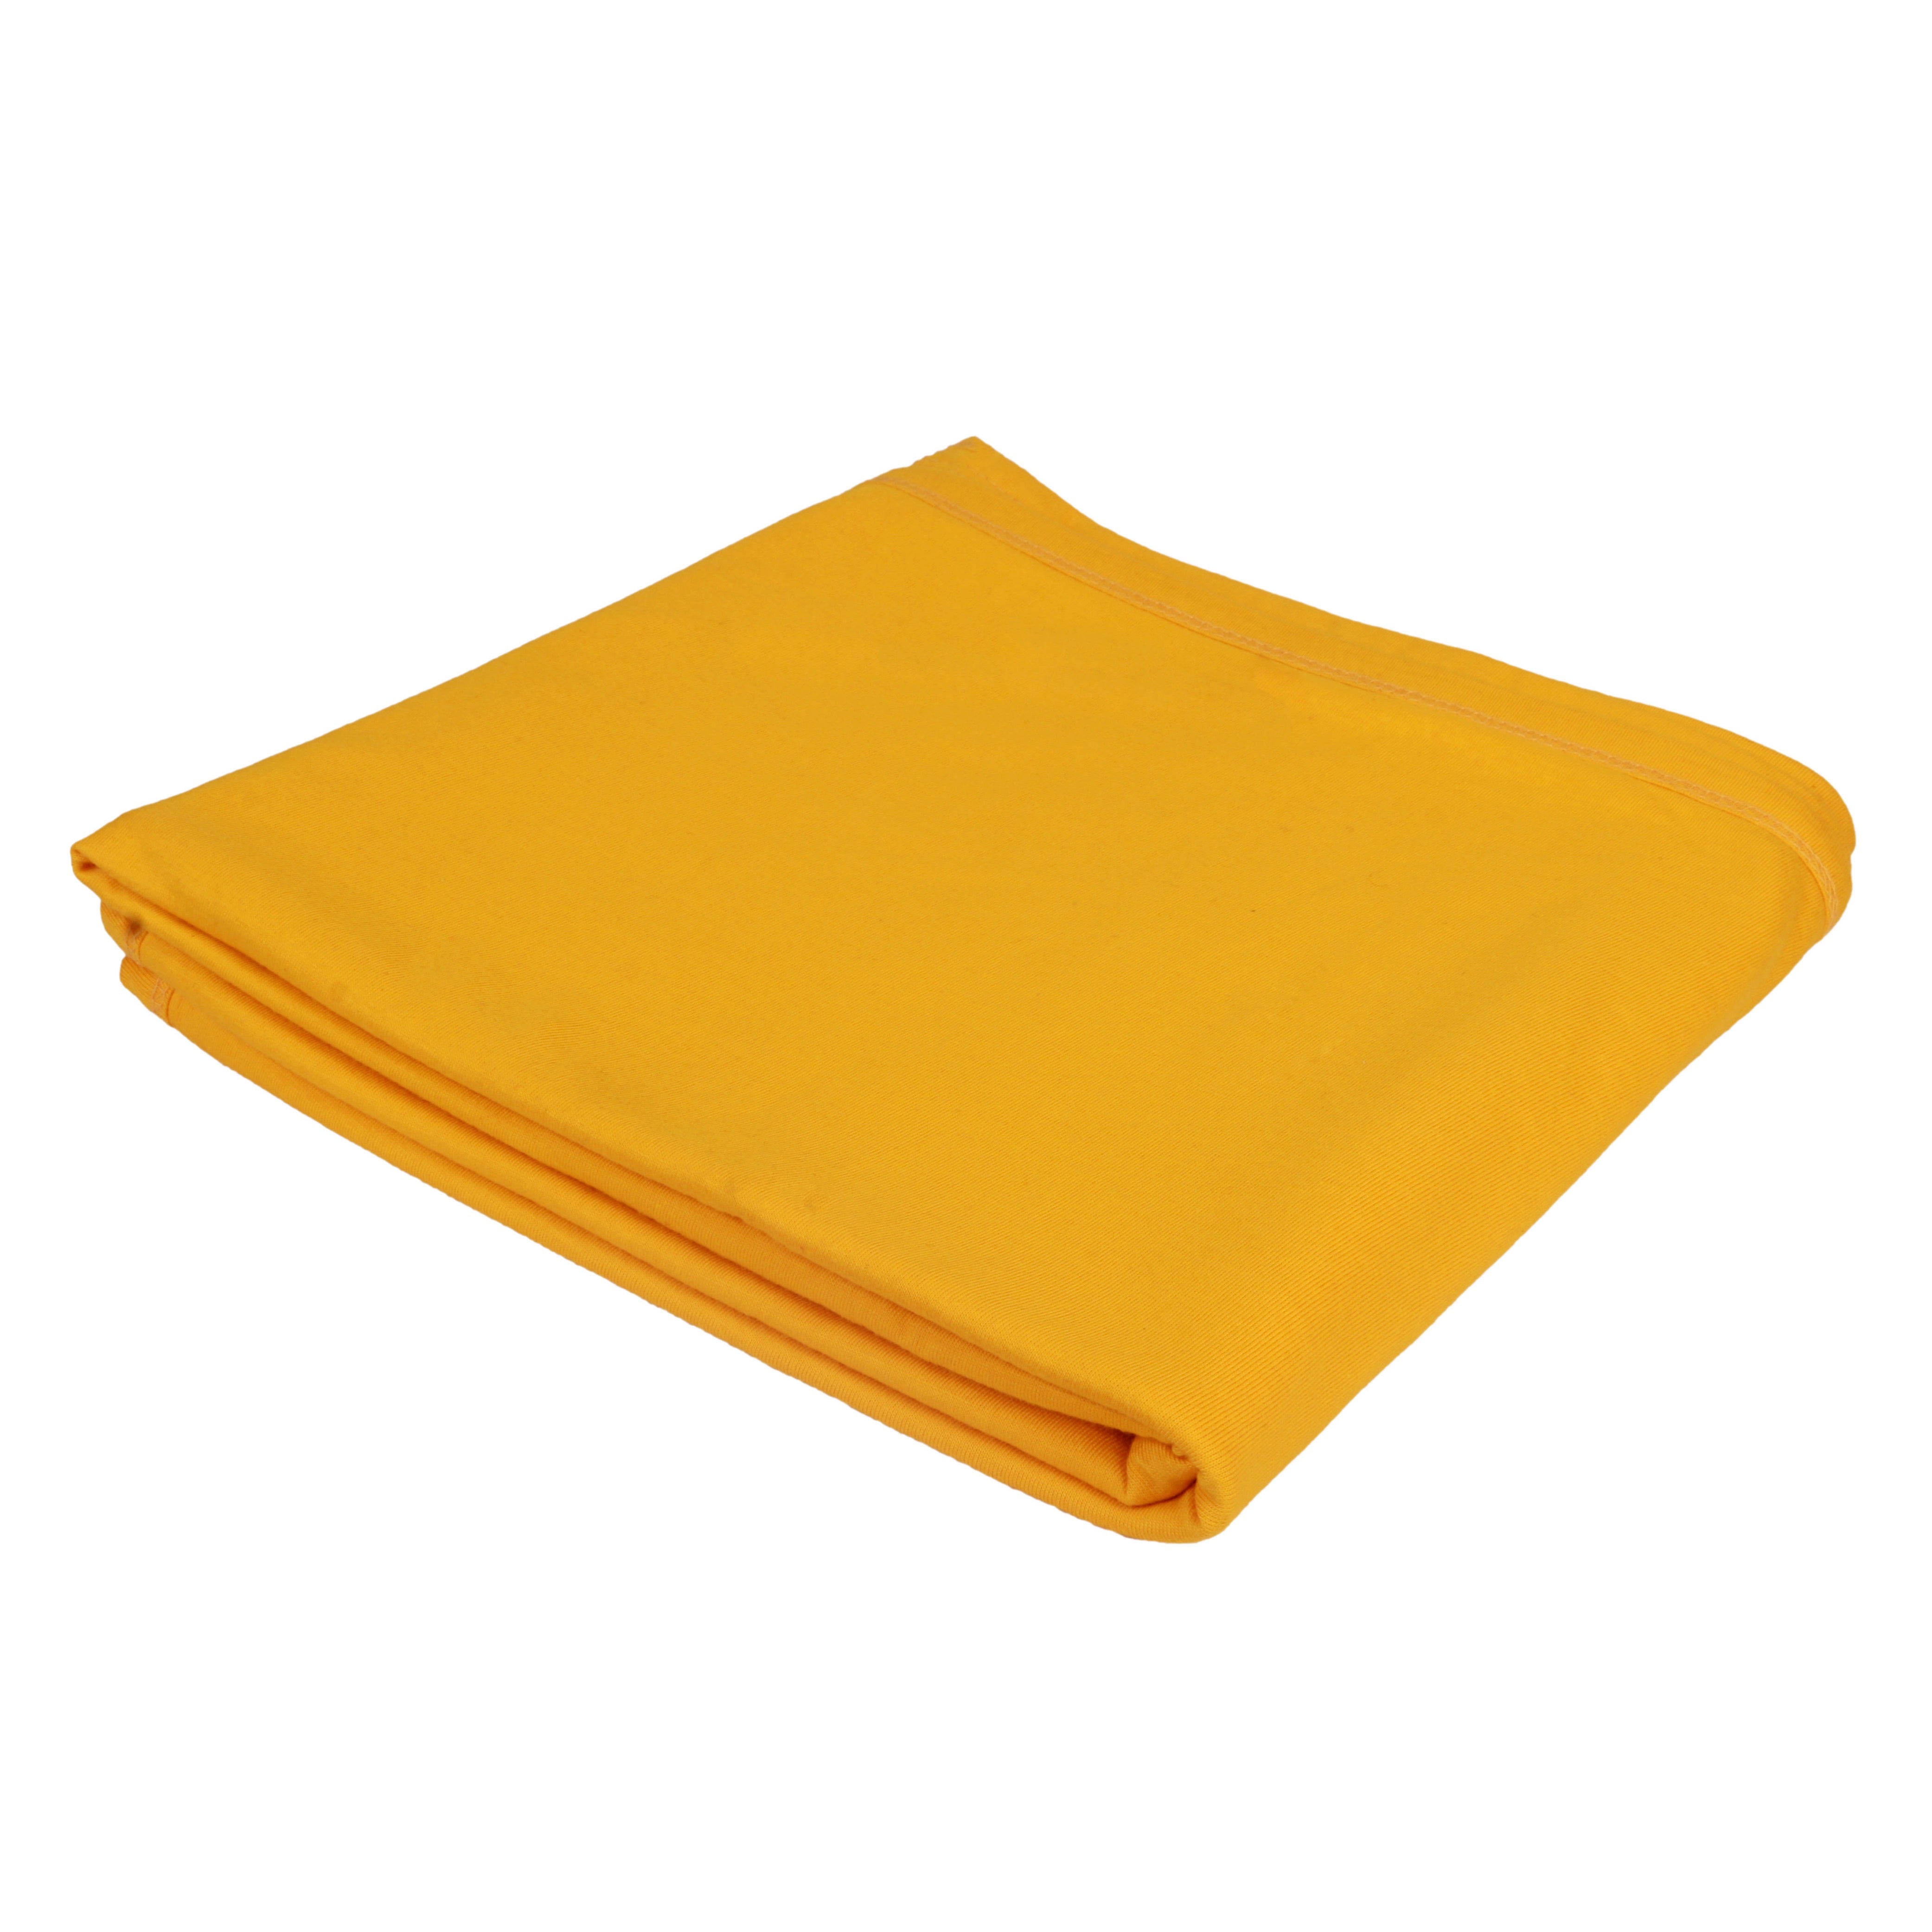 Little By Little 100% Anti Viral, Cotton, Reusable, Anti bacterial & Water Repellent Baby Blanket - Yellow